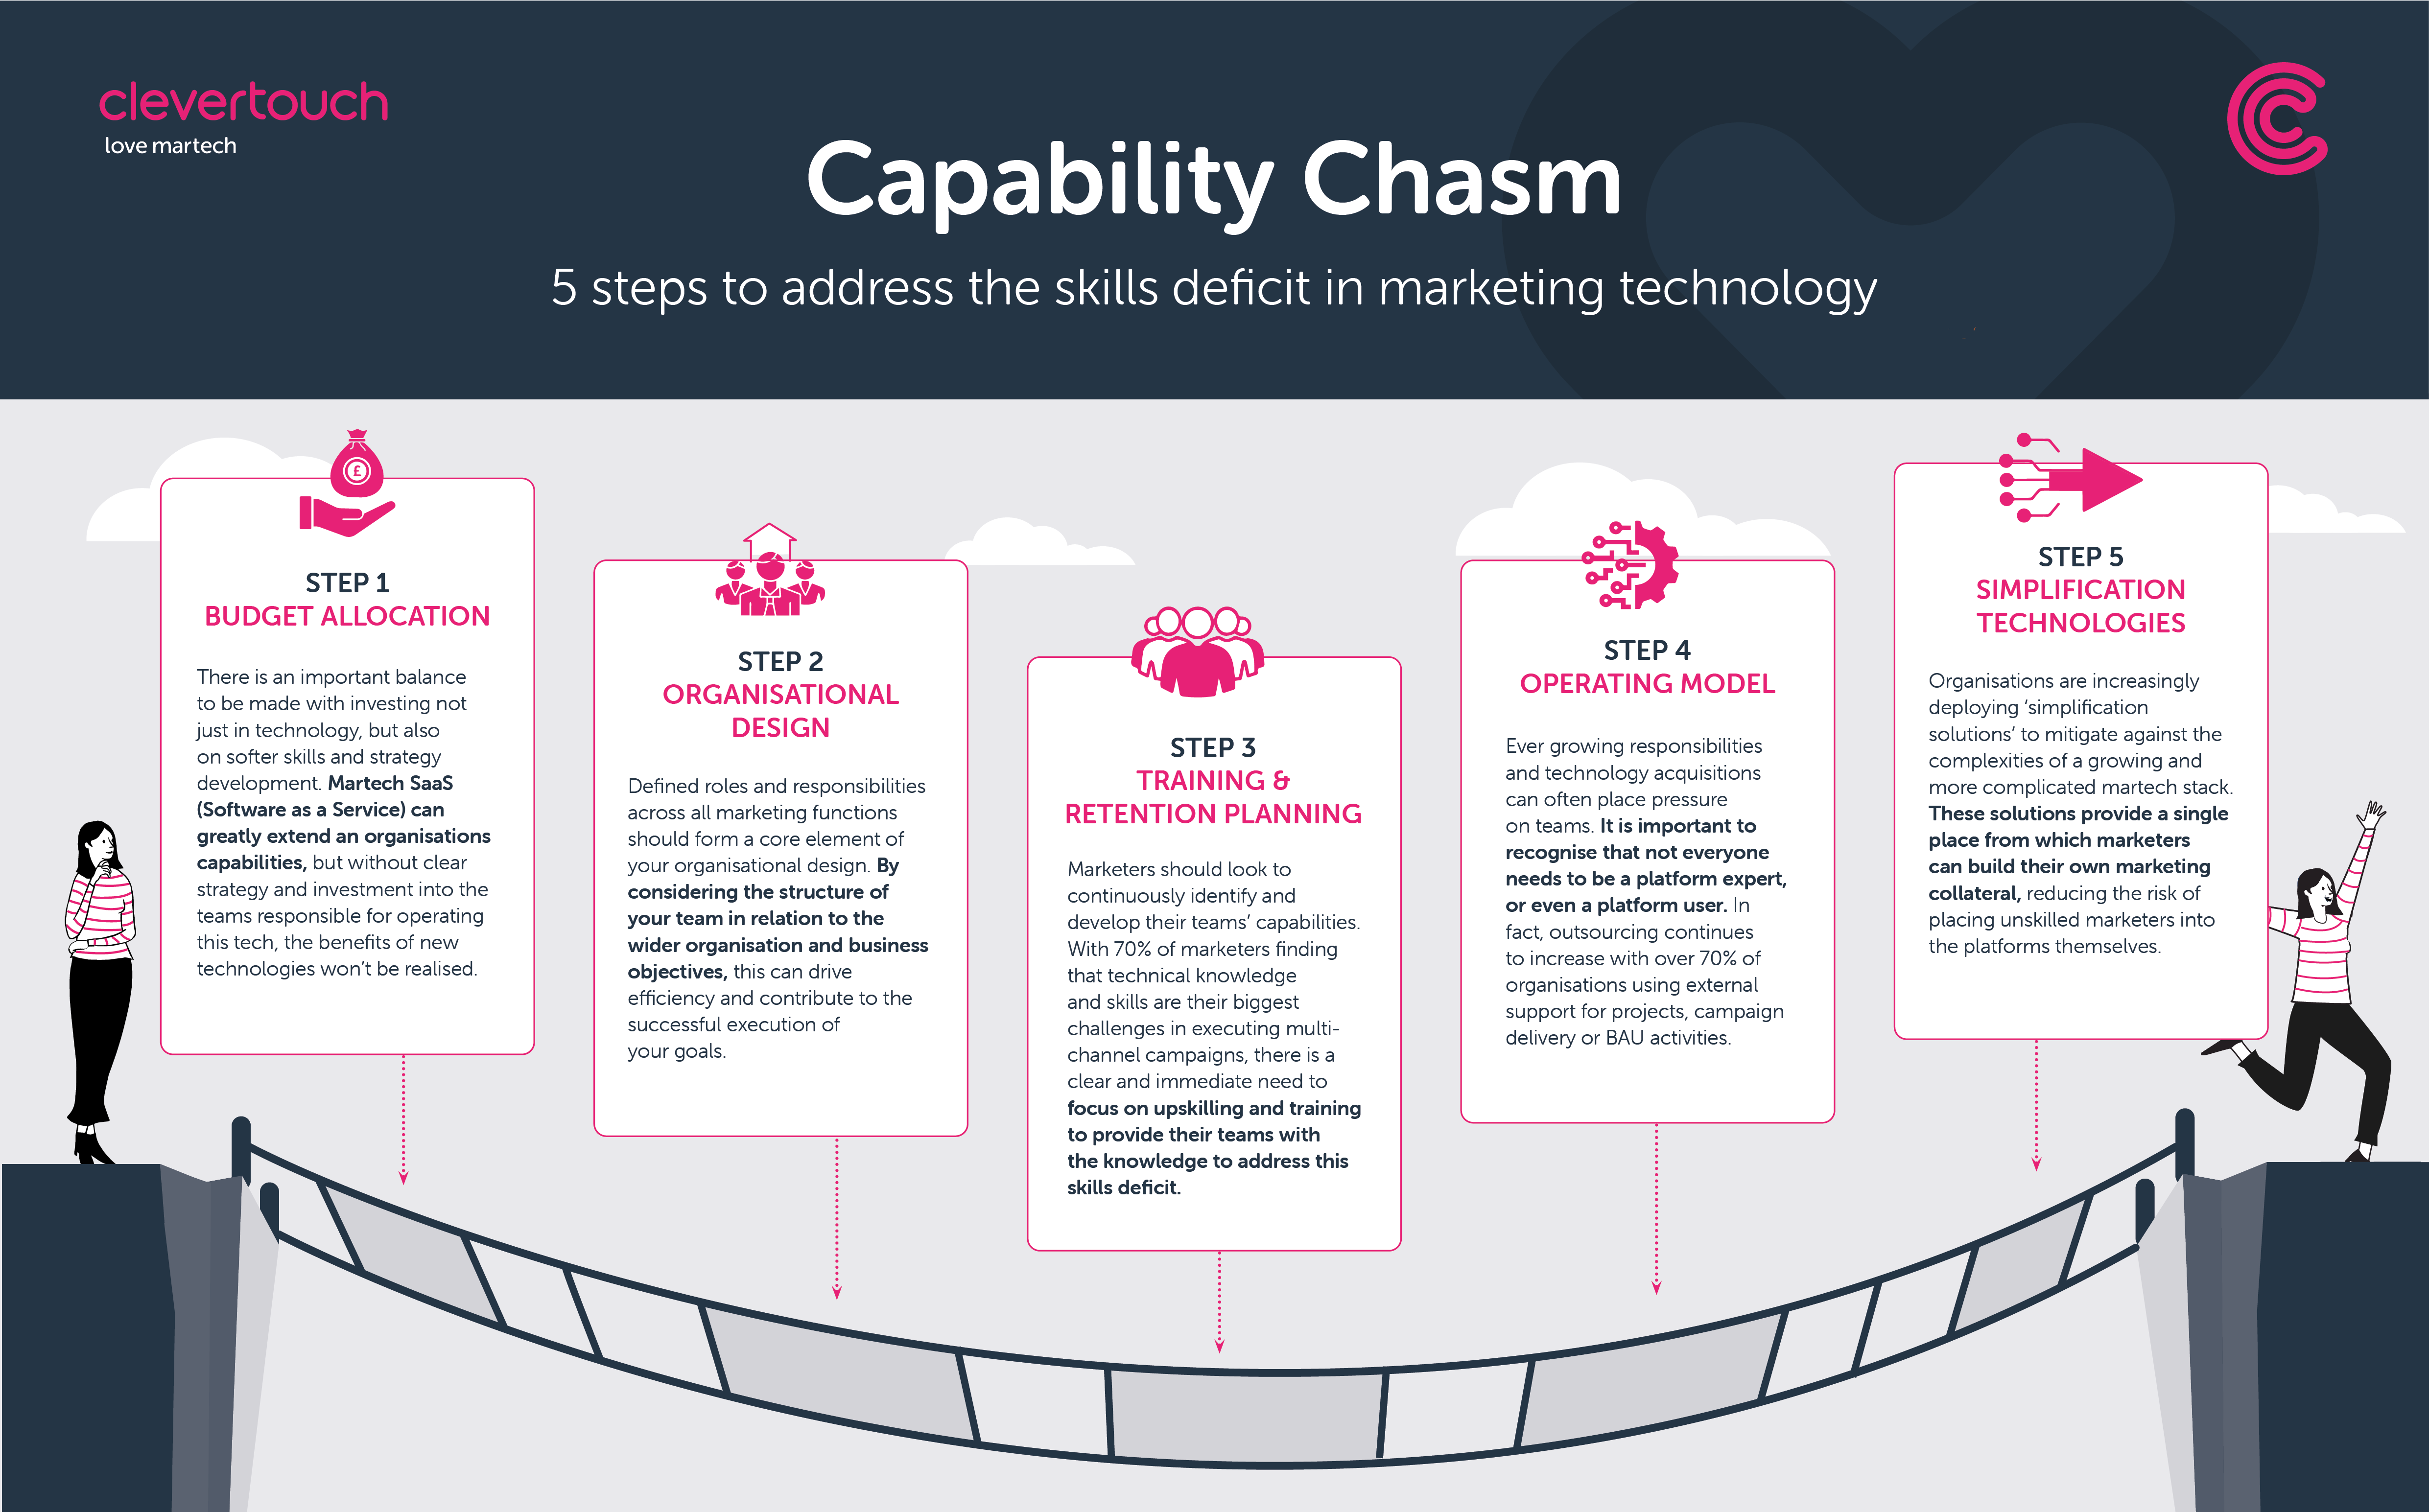 Martech Capability Chasm. Clevertouch